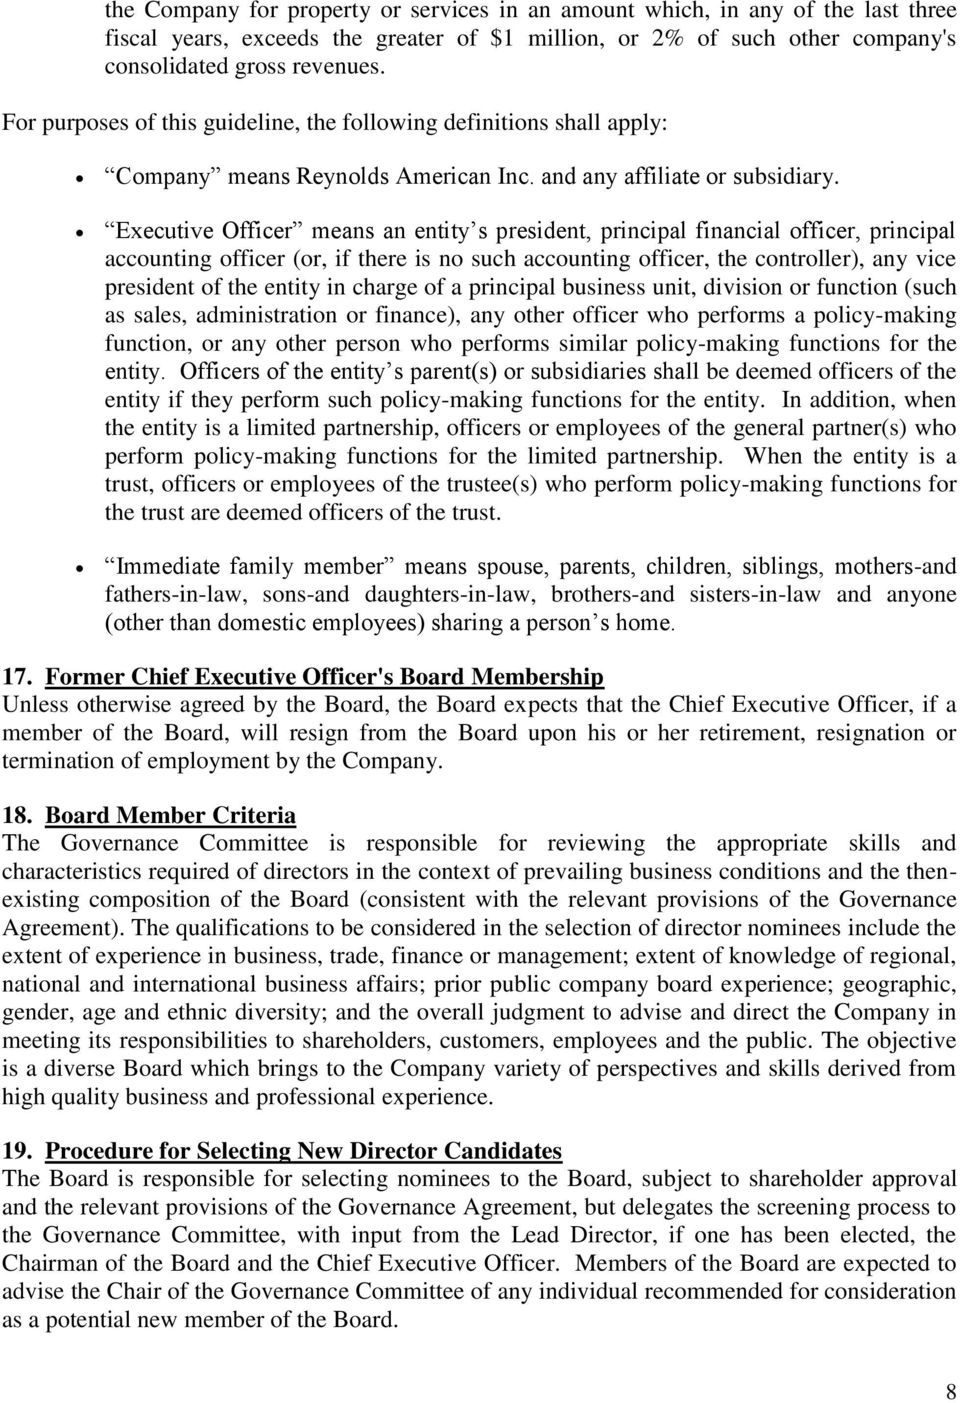 Executive Officer means an entity s president, principal financial officer, principal accounting officer (or, if there is no such accounting officer, the controller), any vice president of the entity